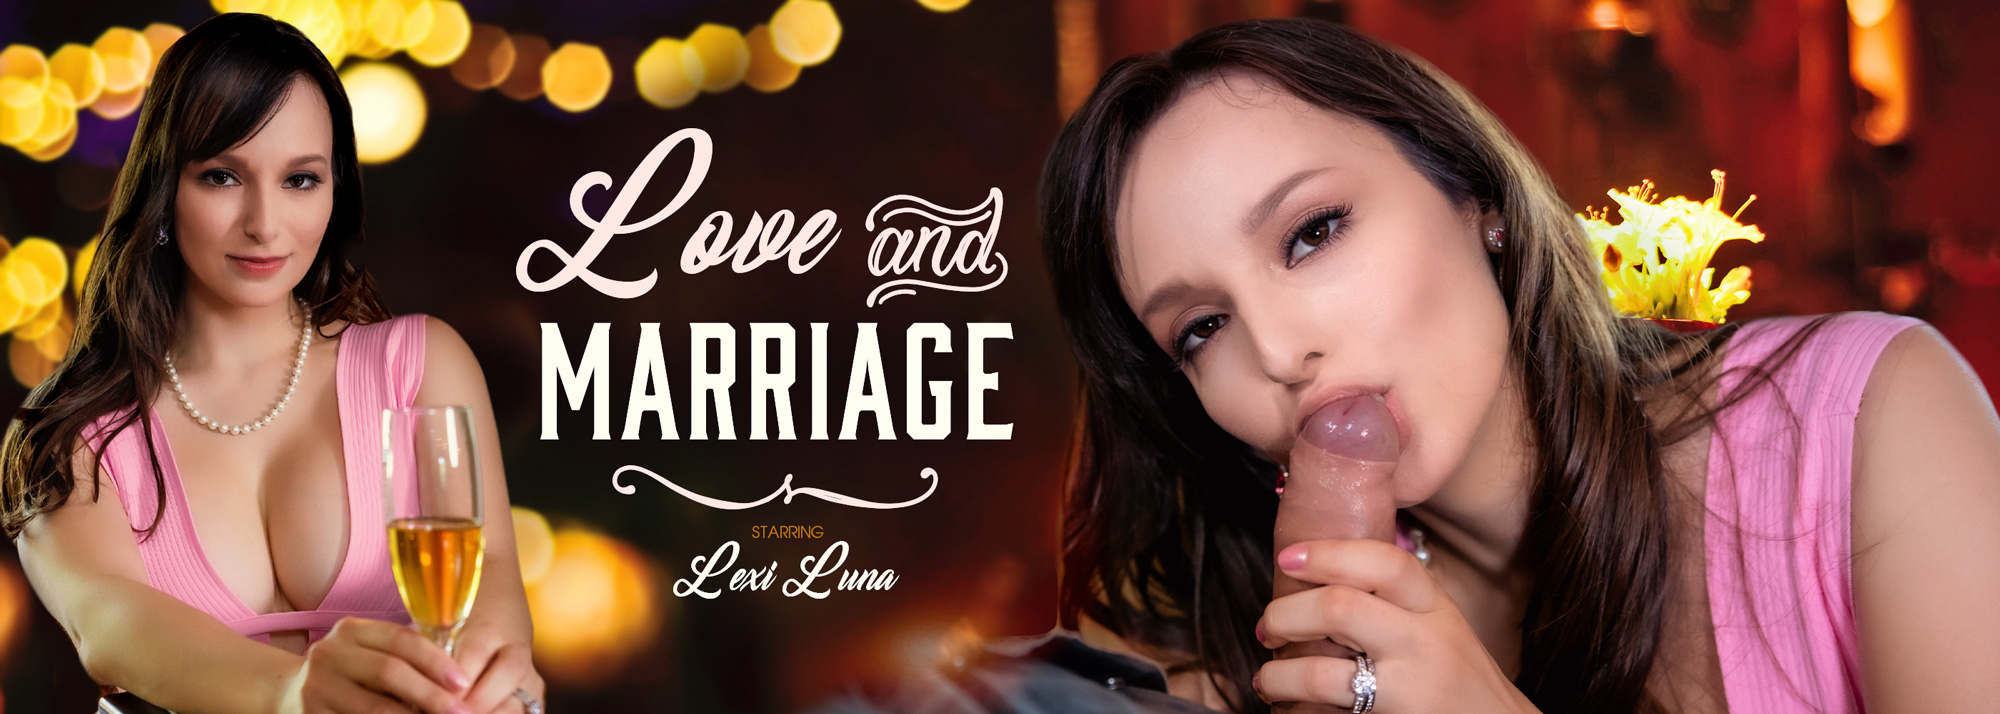 Marriage Xxx Video Hd - Love and Marriage VR Porn Video: 8K, 4K, Full HD and 180/360 POV | VR  Bangers